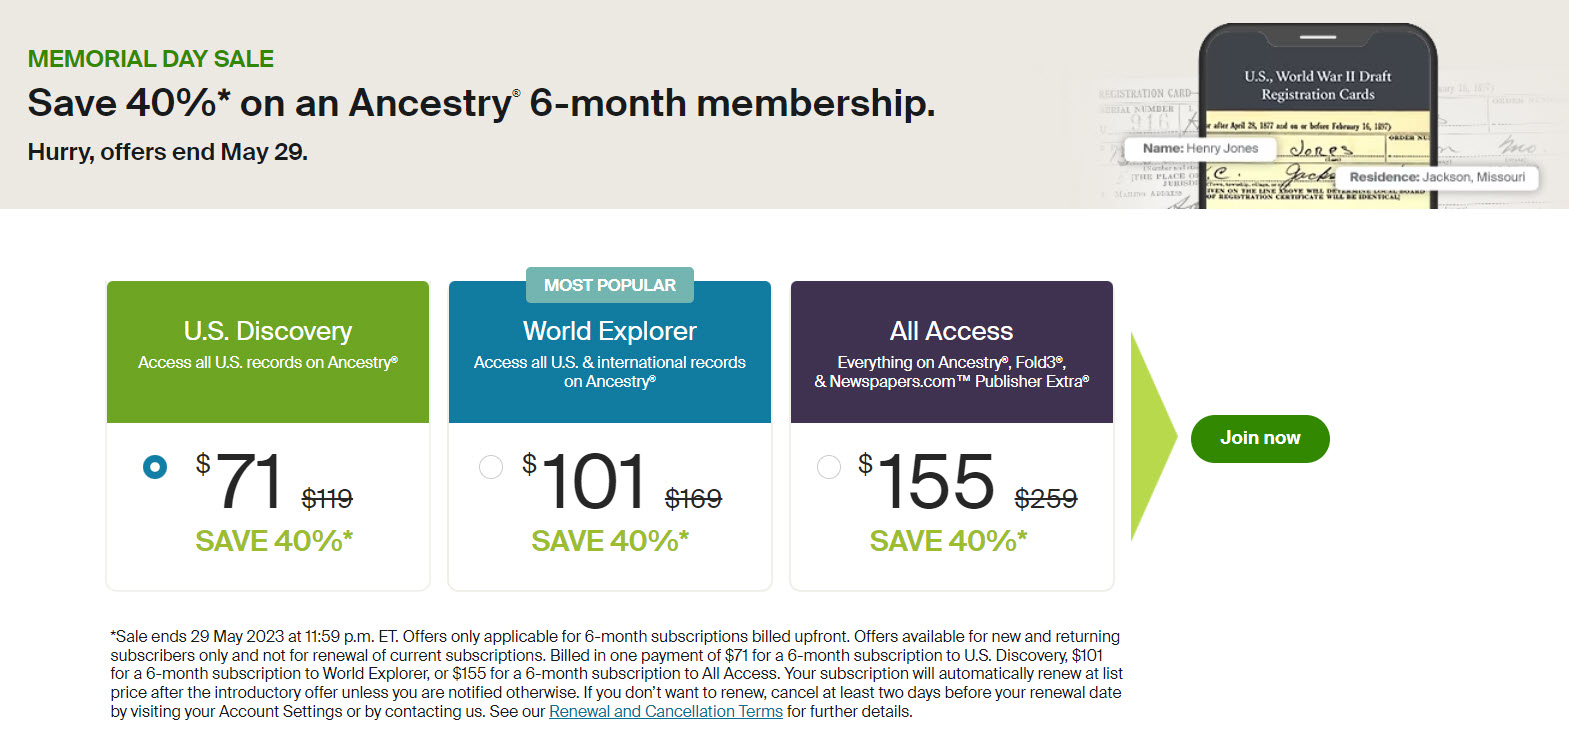 YAZZZZ! As I predicted yesterday, Ancestry is offering 40% off 6-month memberships as part of the Ancestry Memorial Day Sale